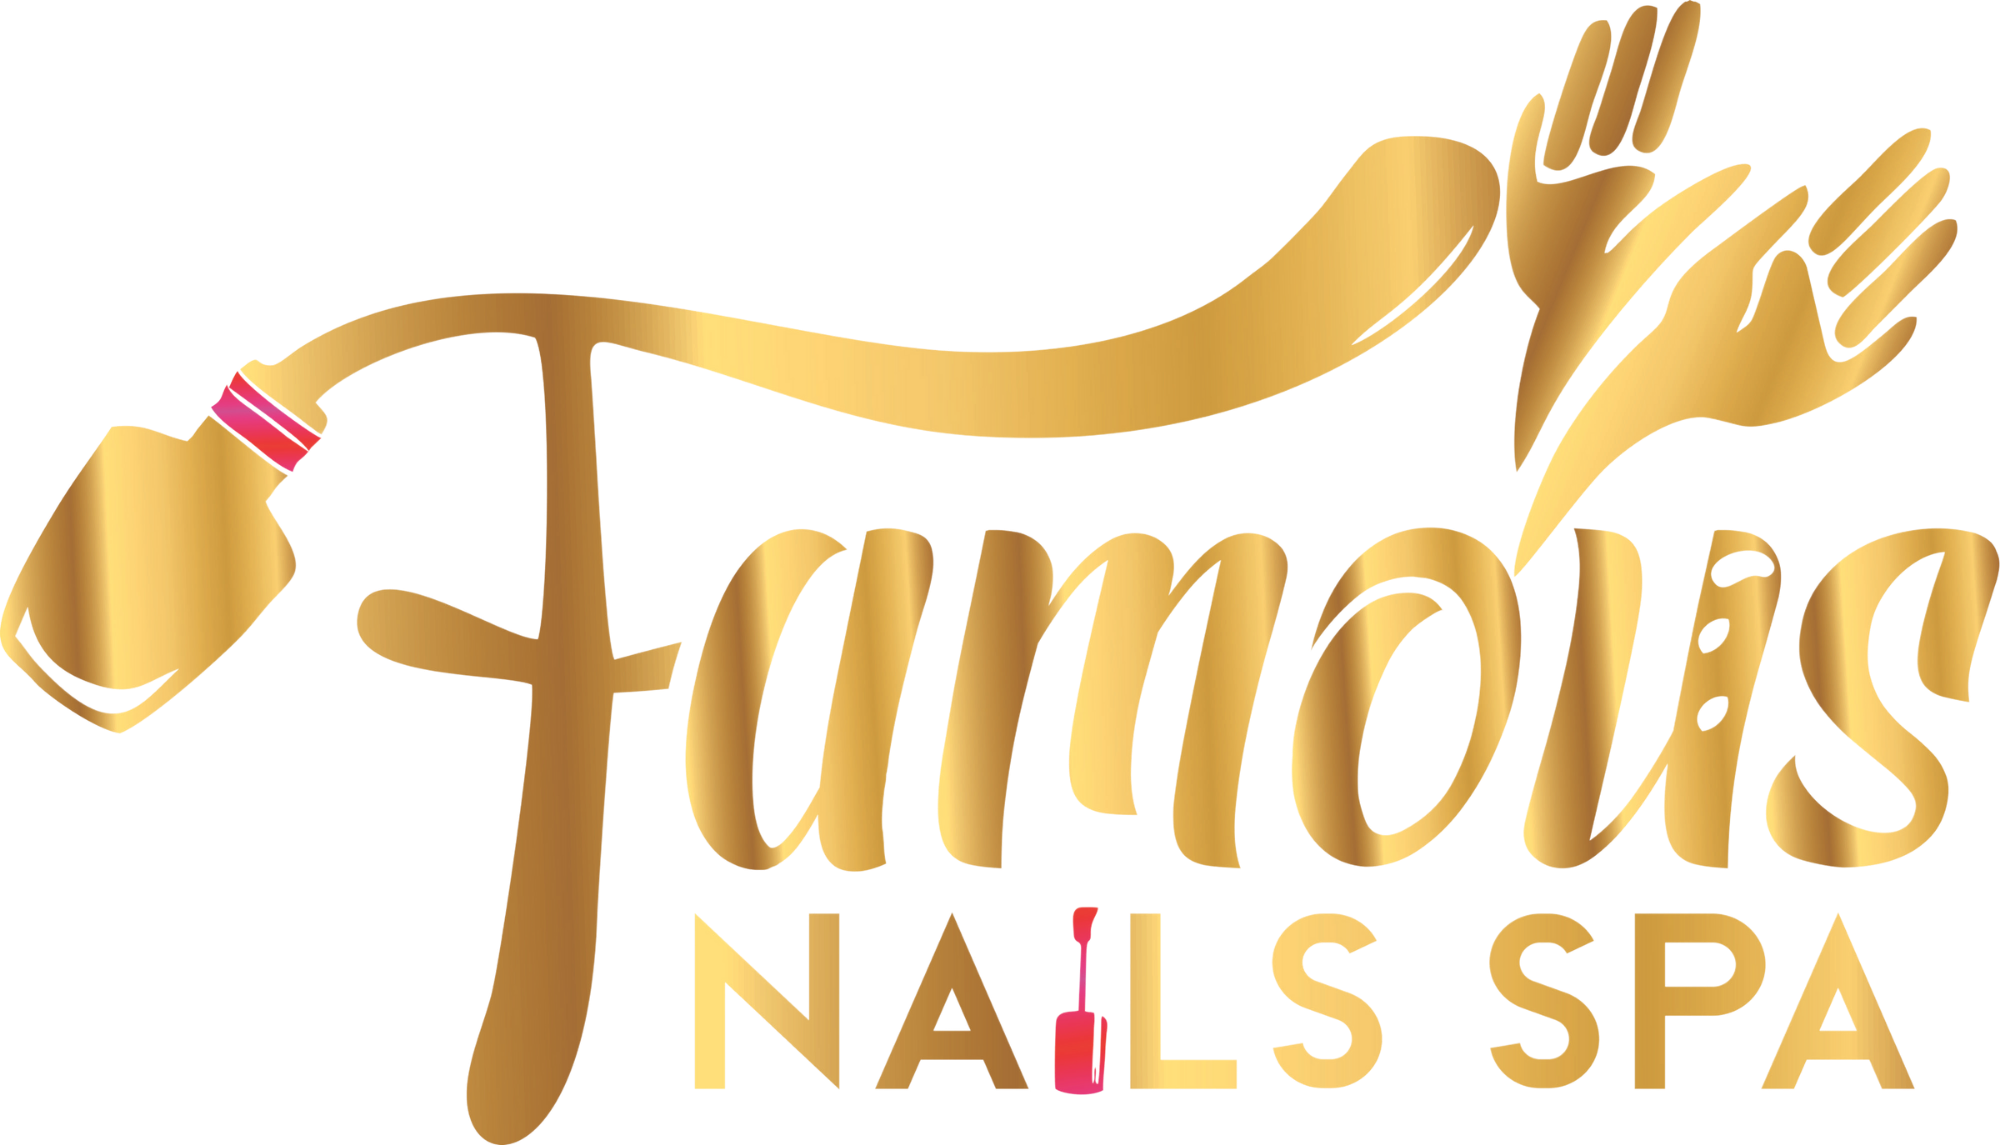 Famous nails and spa